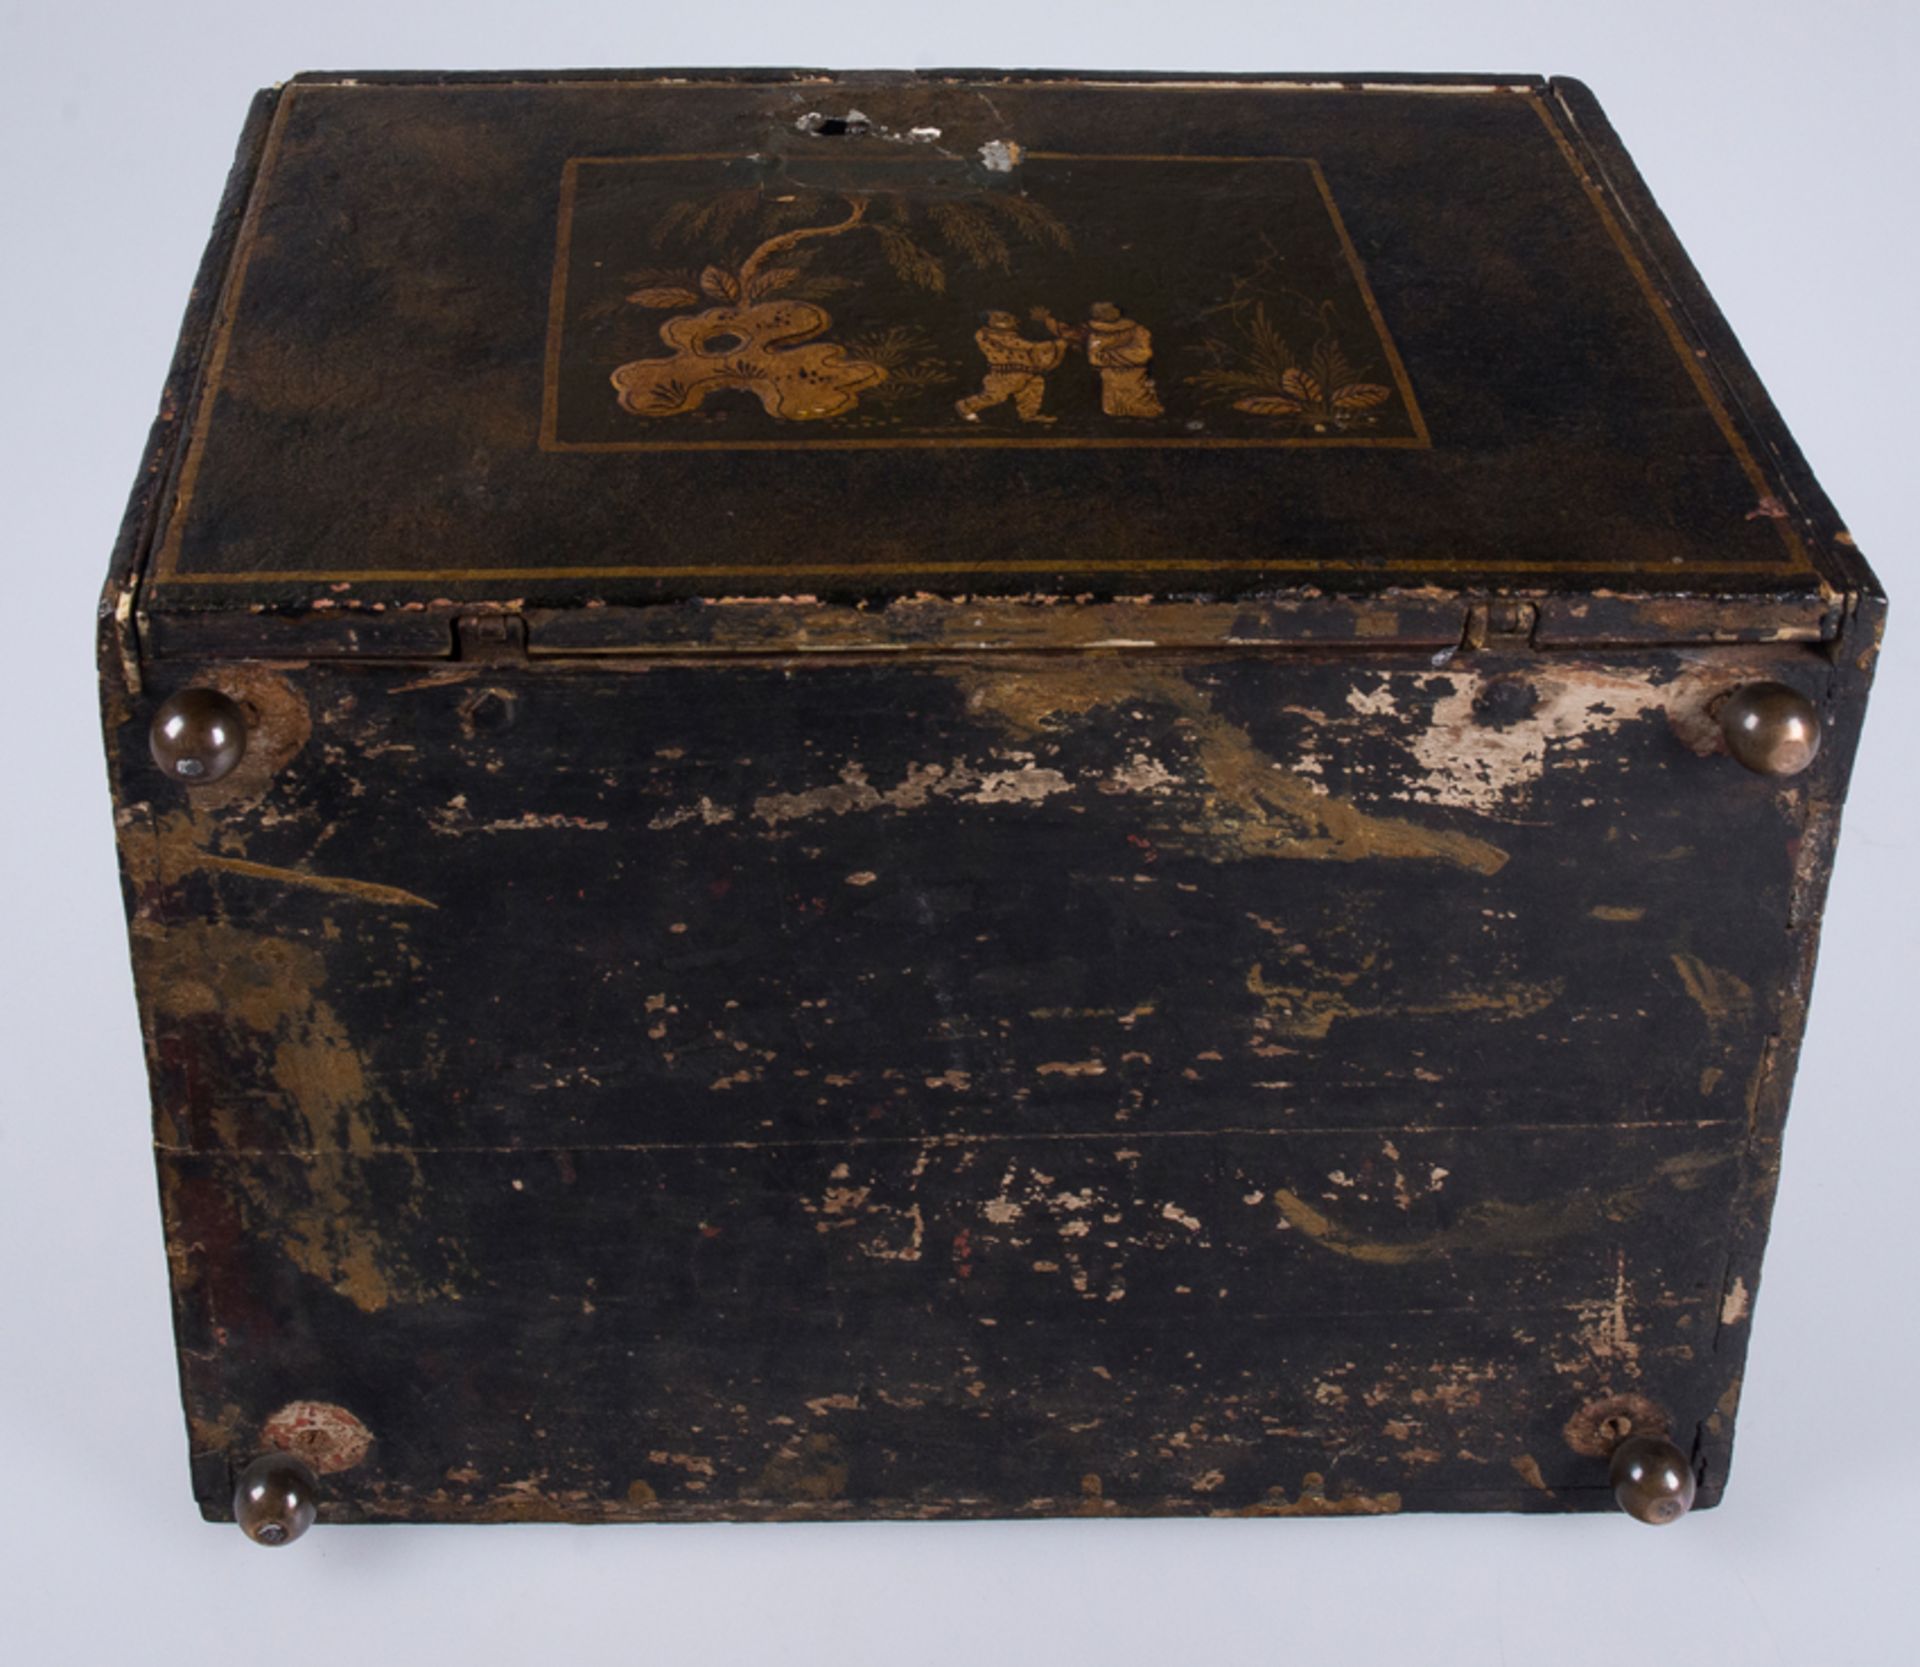 Gilded, lacquered wooden chest with engraved and gilded ivory interior. Indo-Portuguese. 18th centur - Image 10 of 10